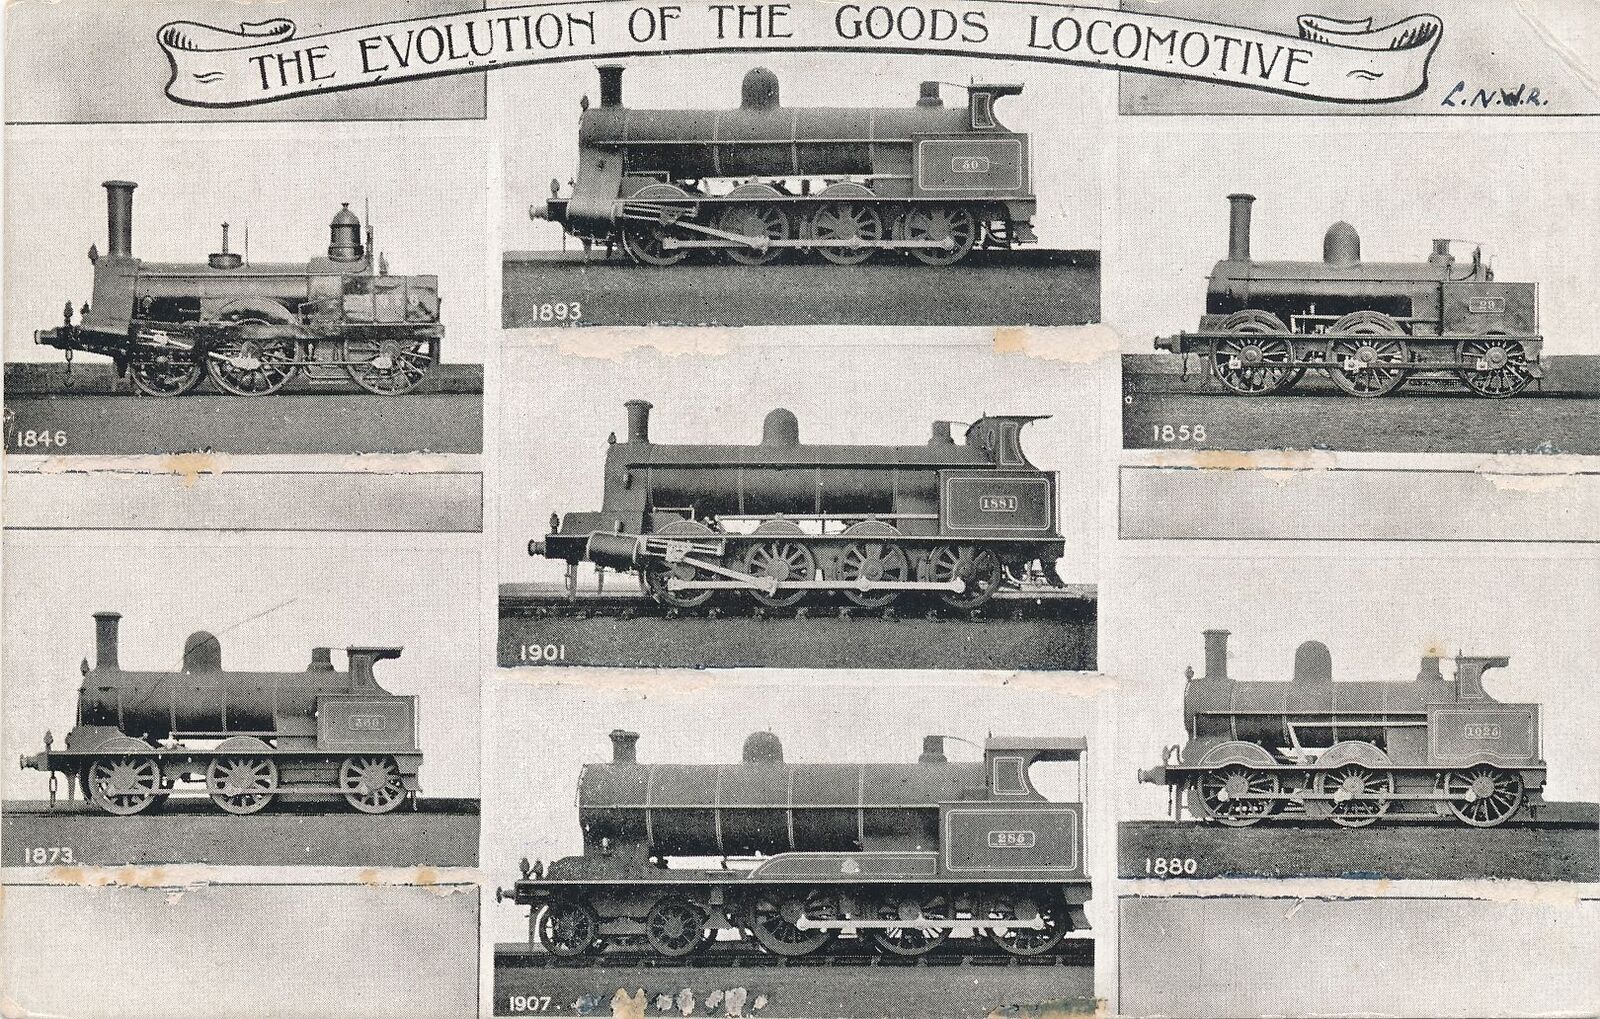 The Evolution Of The Goods Locomotive London and North Western Railway